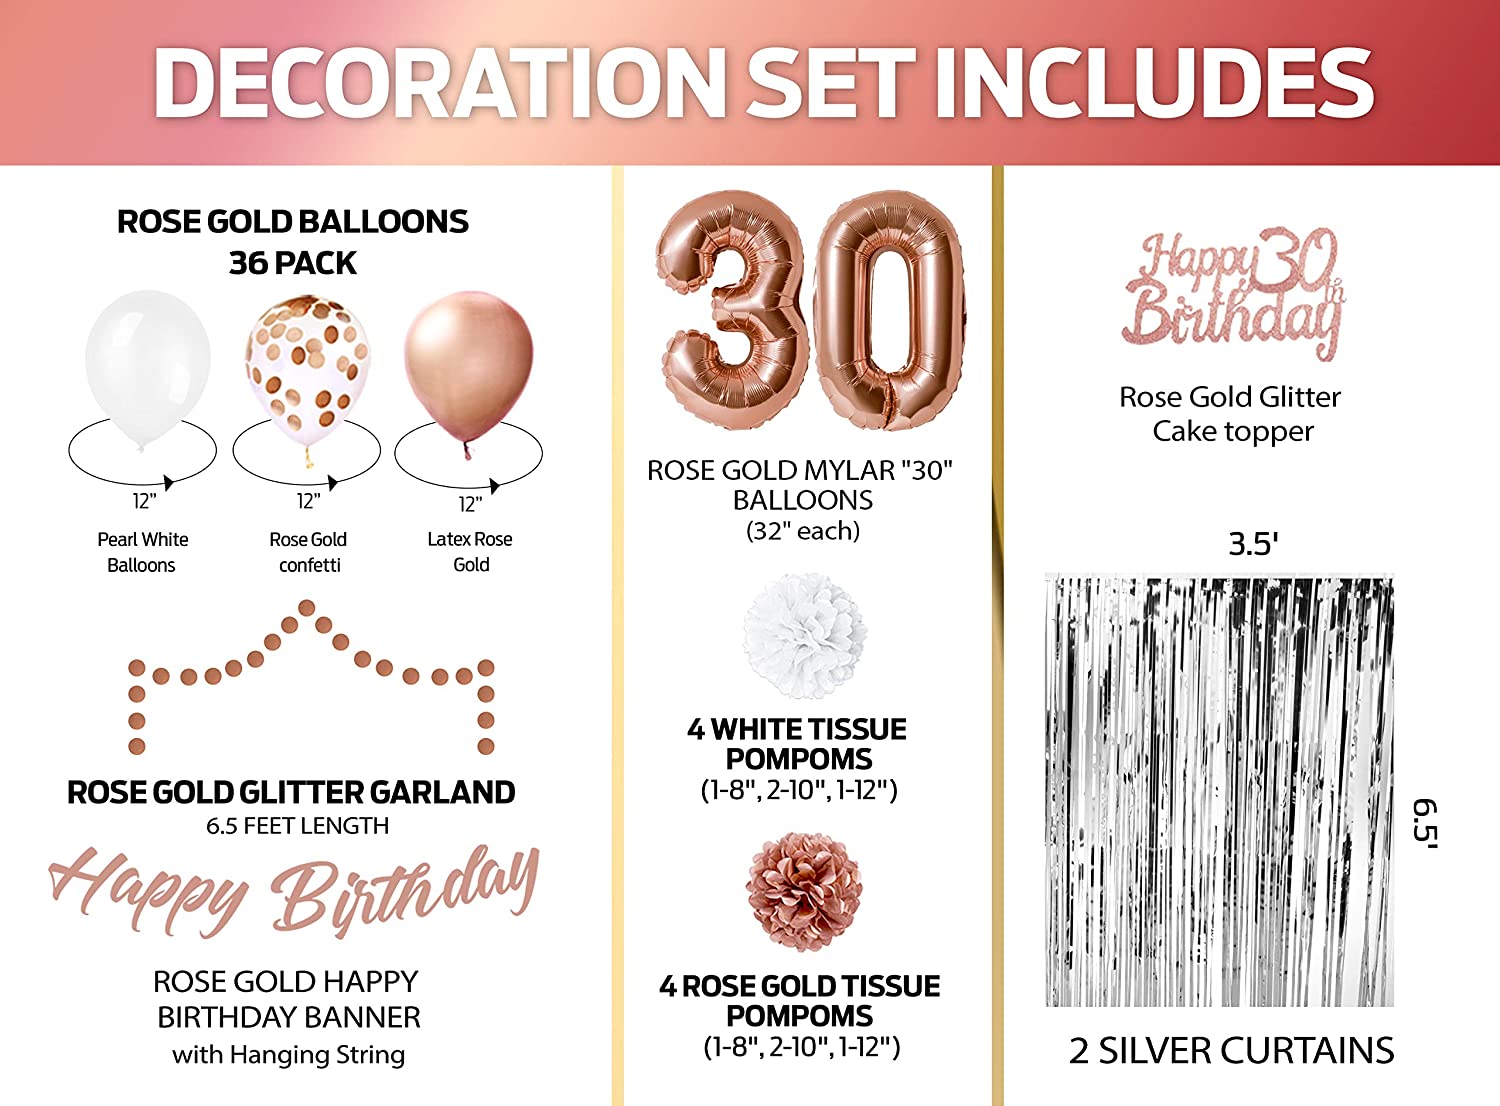 Epiqueone Baby Shower Decorations for Girl - It's A Girl Princess Party Decoration Kit - 52-Piece Complete Set - Rose Gold 